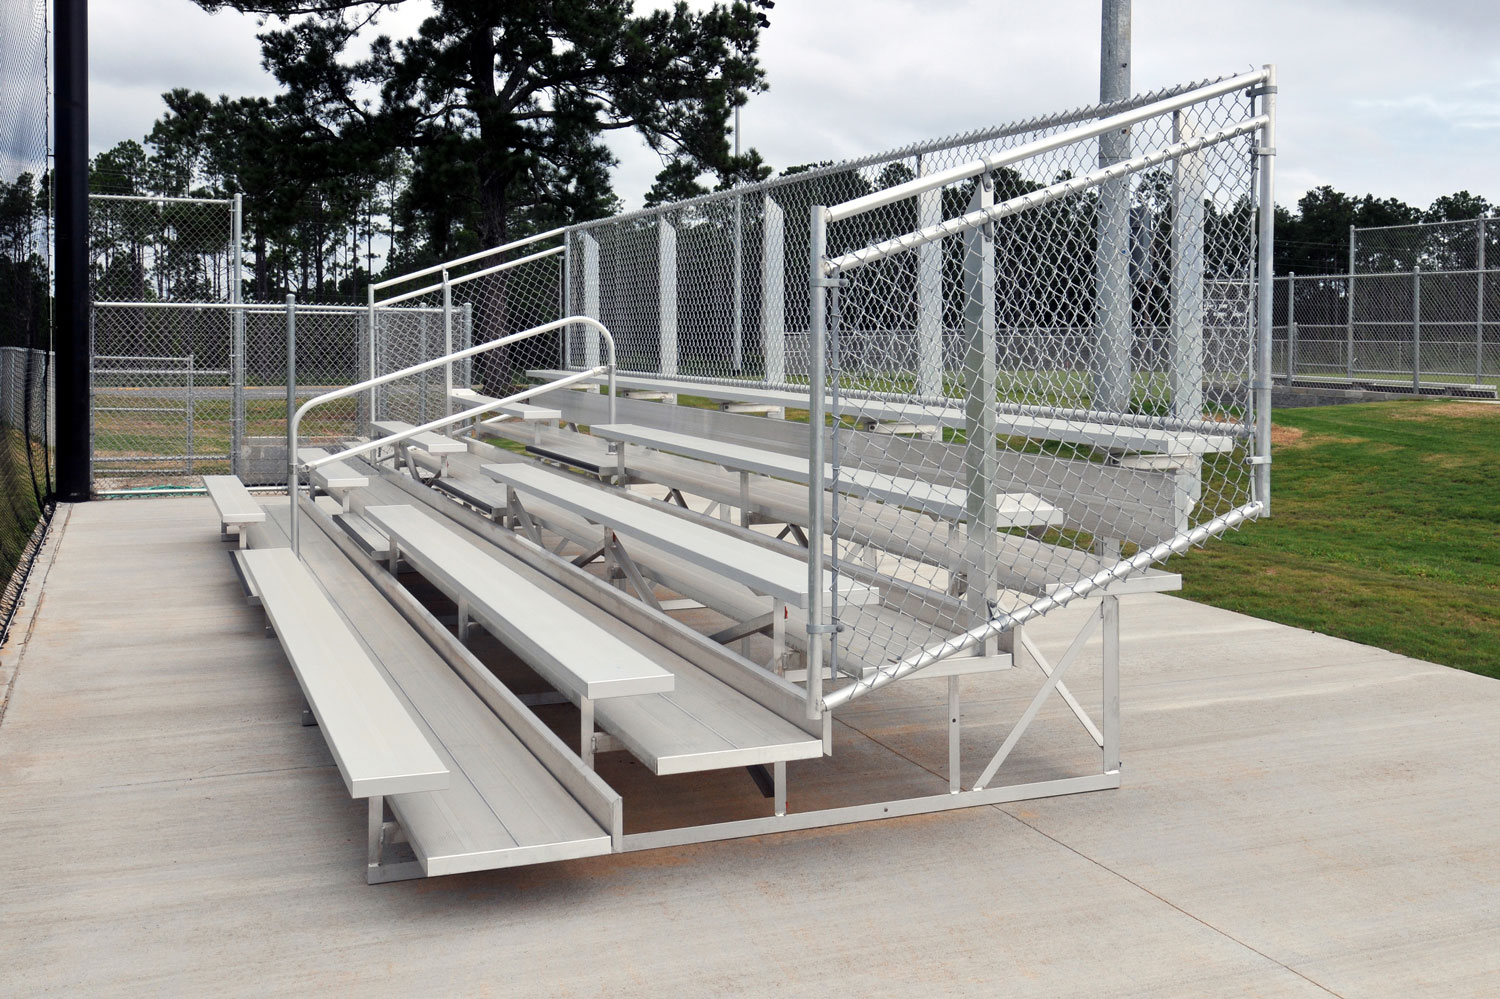 Bleachers Seats & Goal Posts, Dugouts, Nets, And More